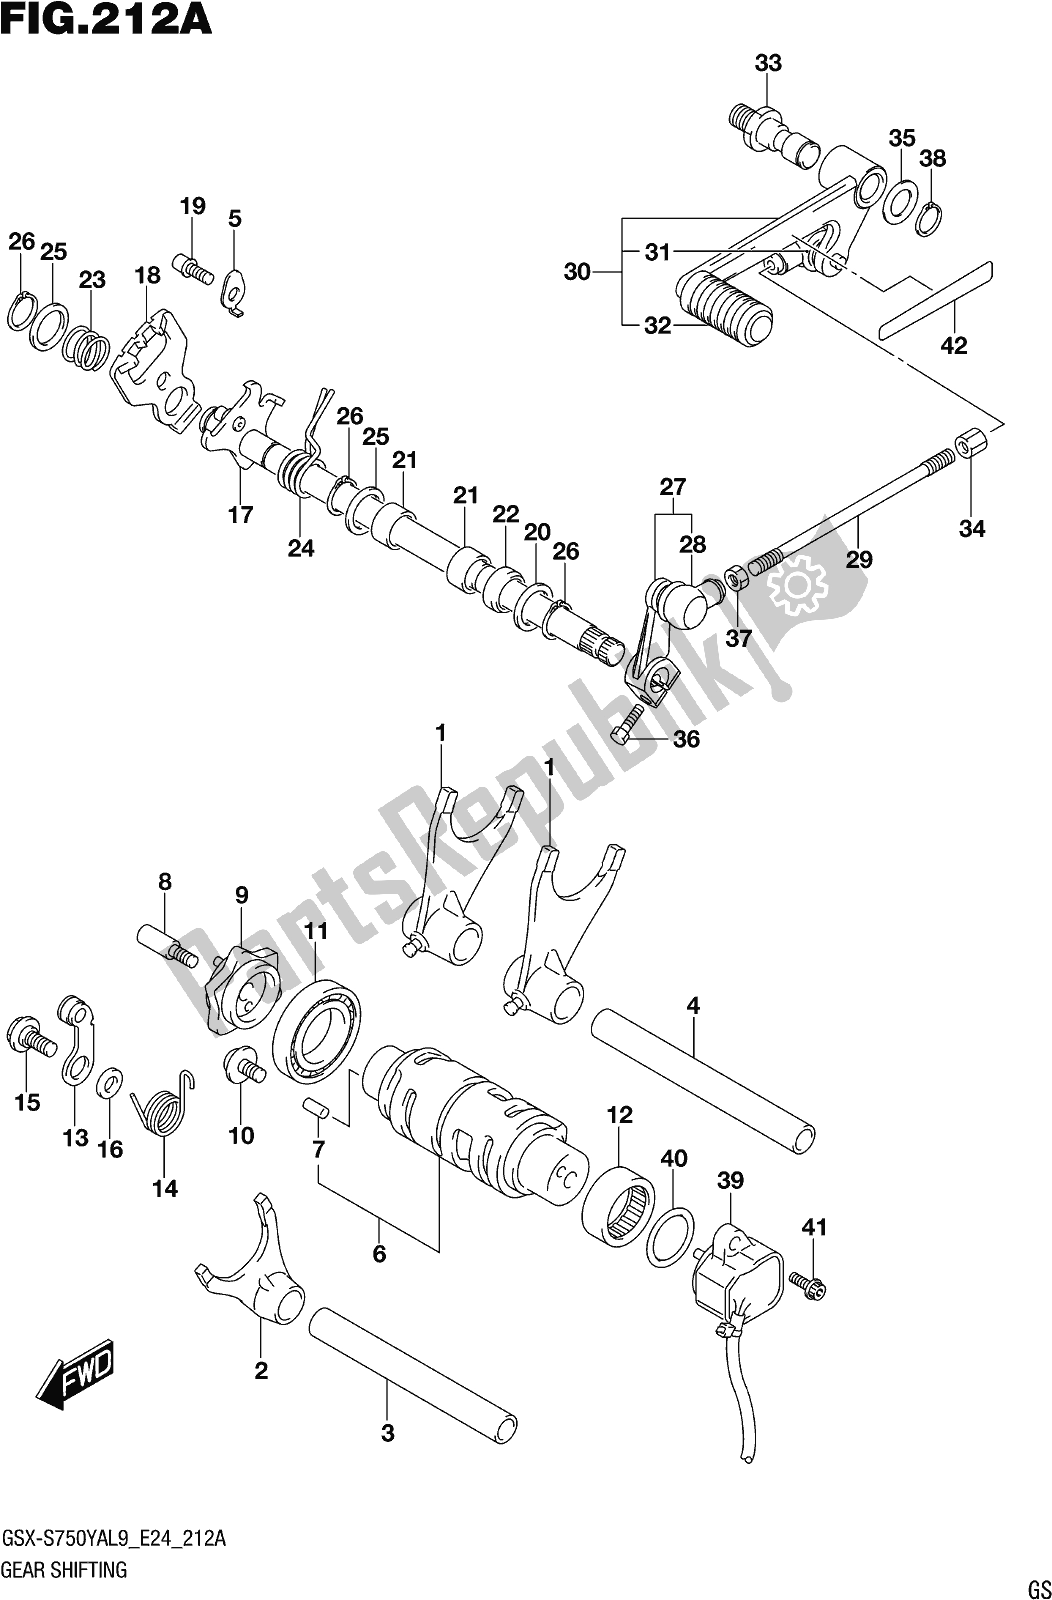 All parts for the Fig. 212a Gear Shifting of the Suzuki Gsx-s 750 YA 2019